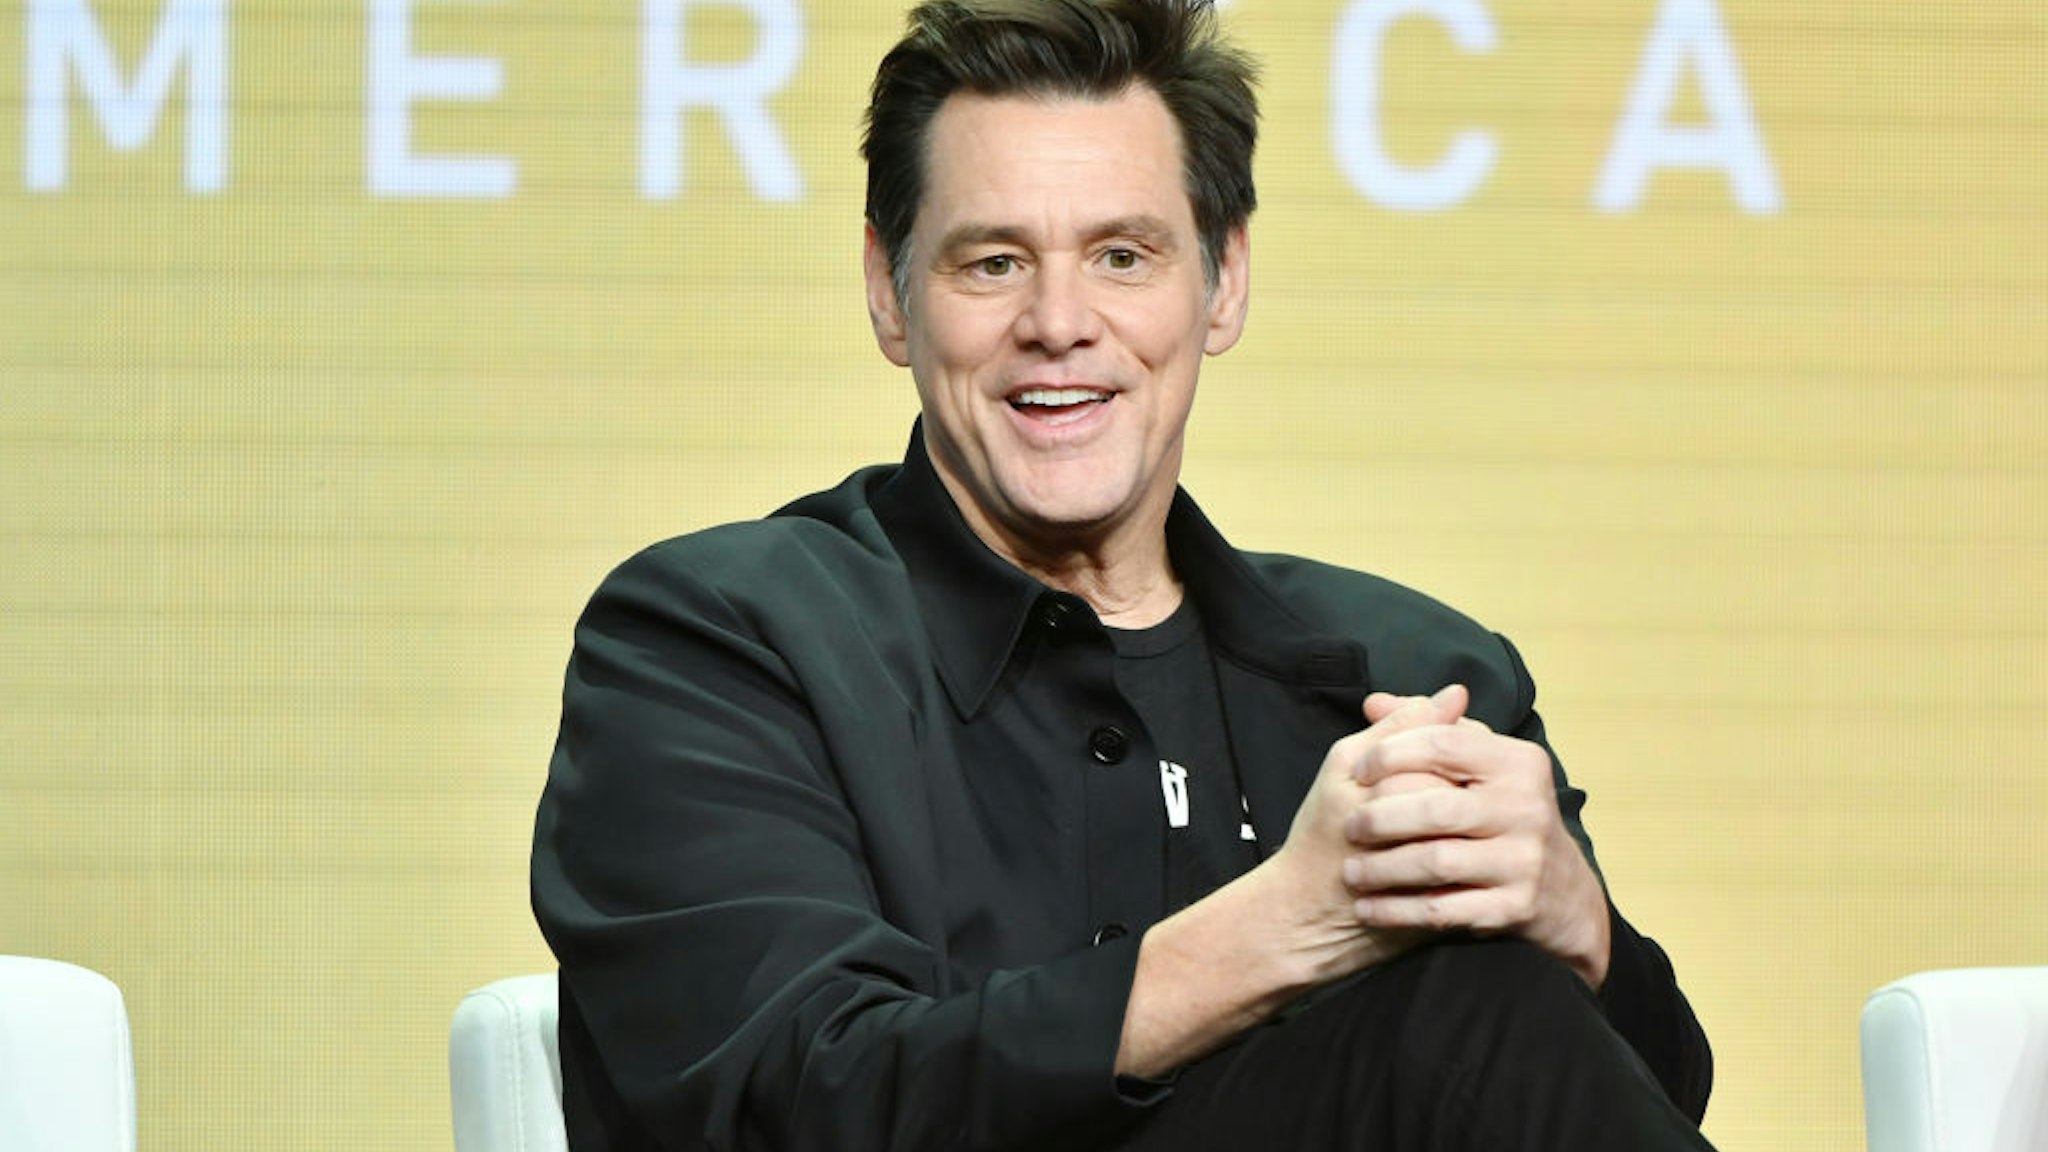 Jim Carrey of "Kidding" speaks during the Showtime segment of the 2019 Summer TCA Press Tour at The Beverly Hilton Hotel on August 2, 2019 in Beverly Hills, California.